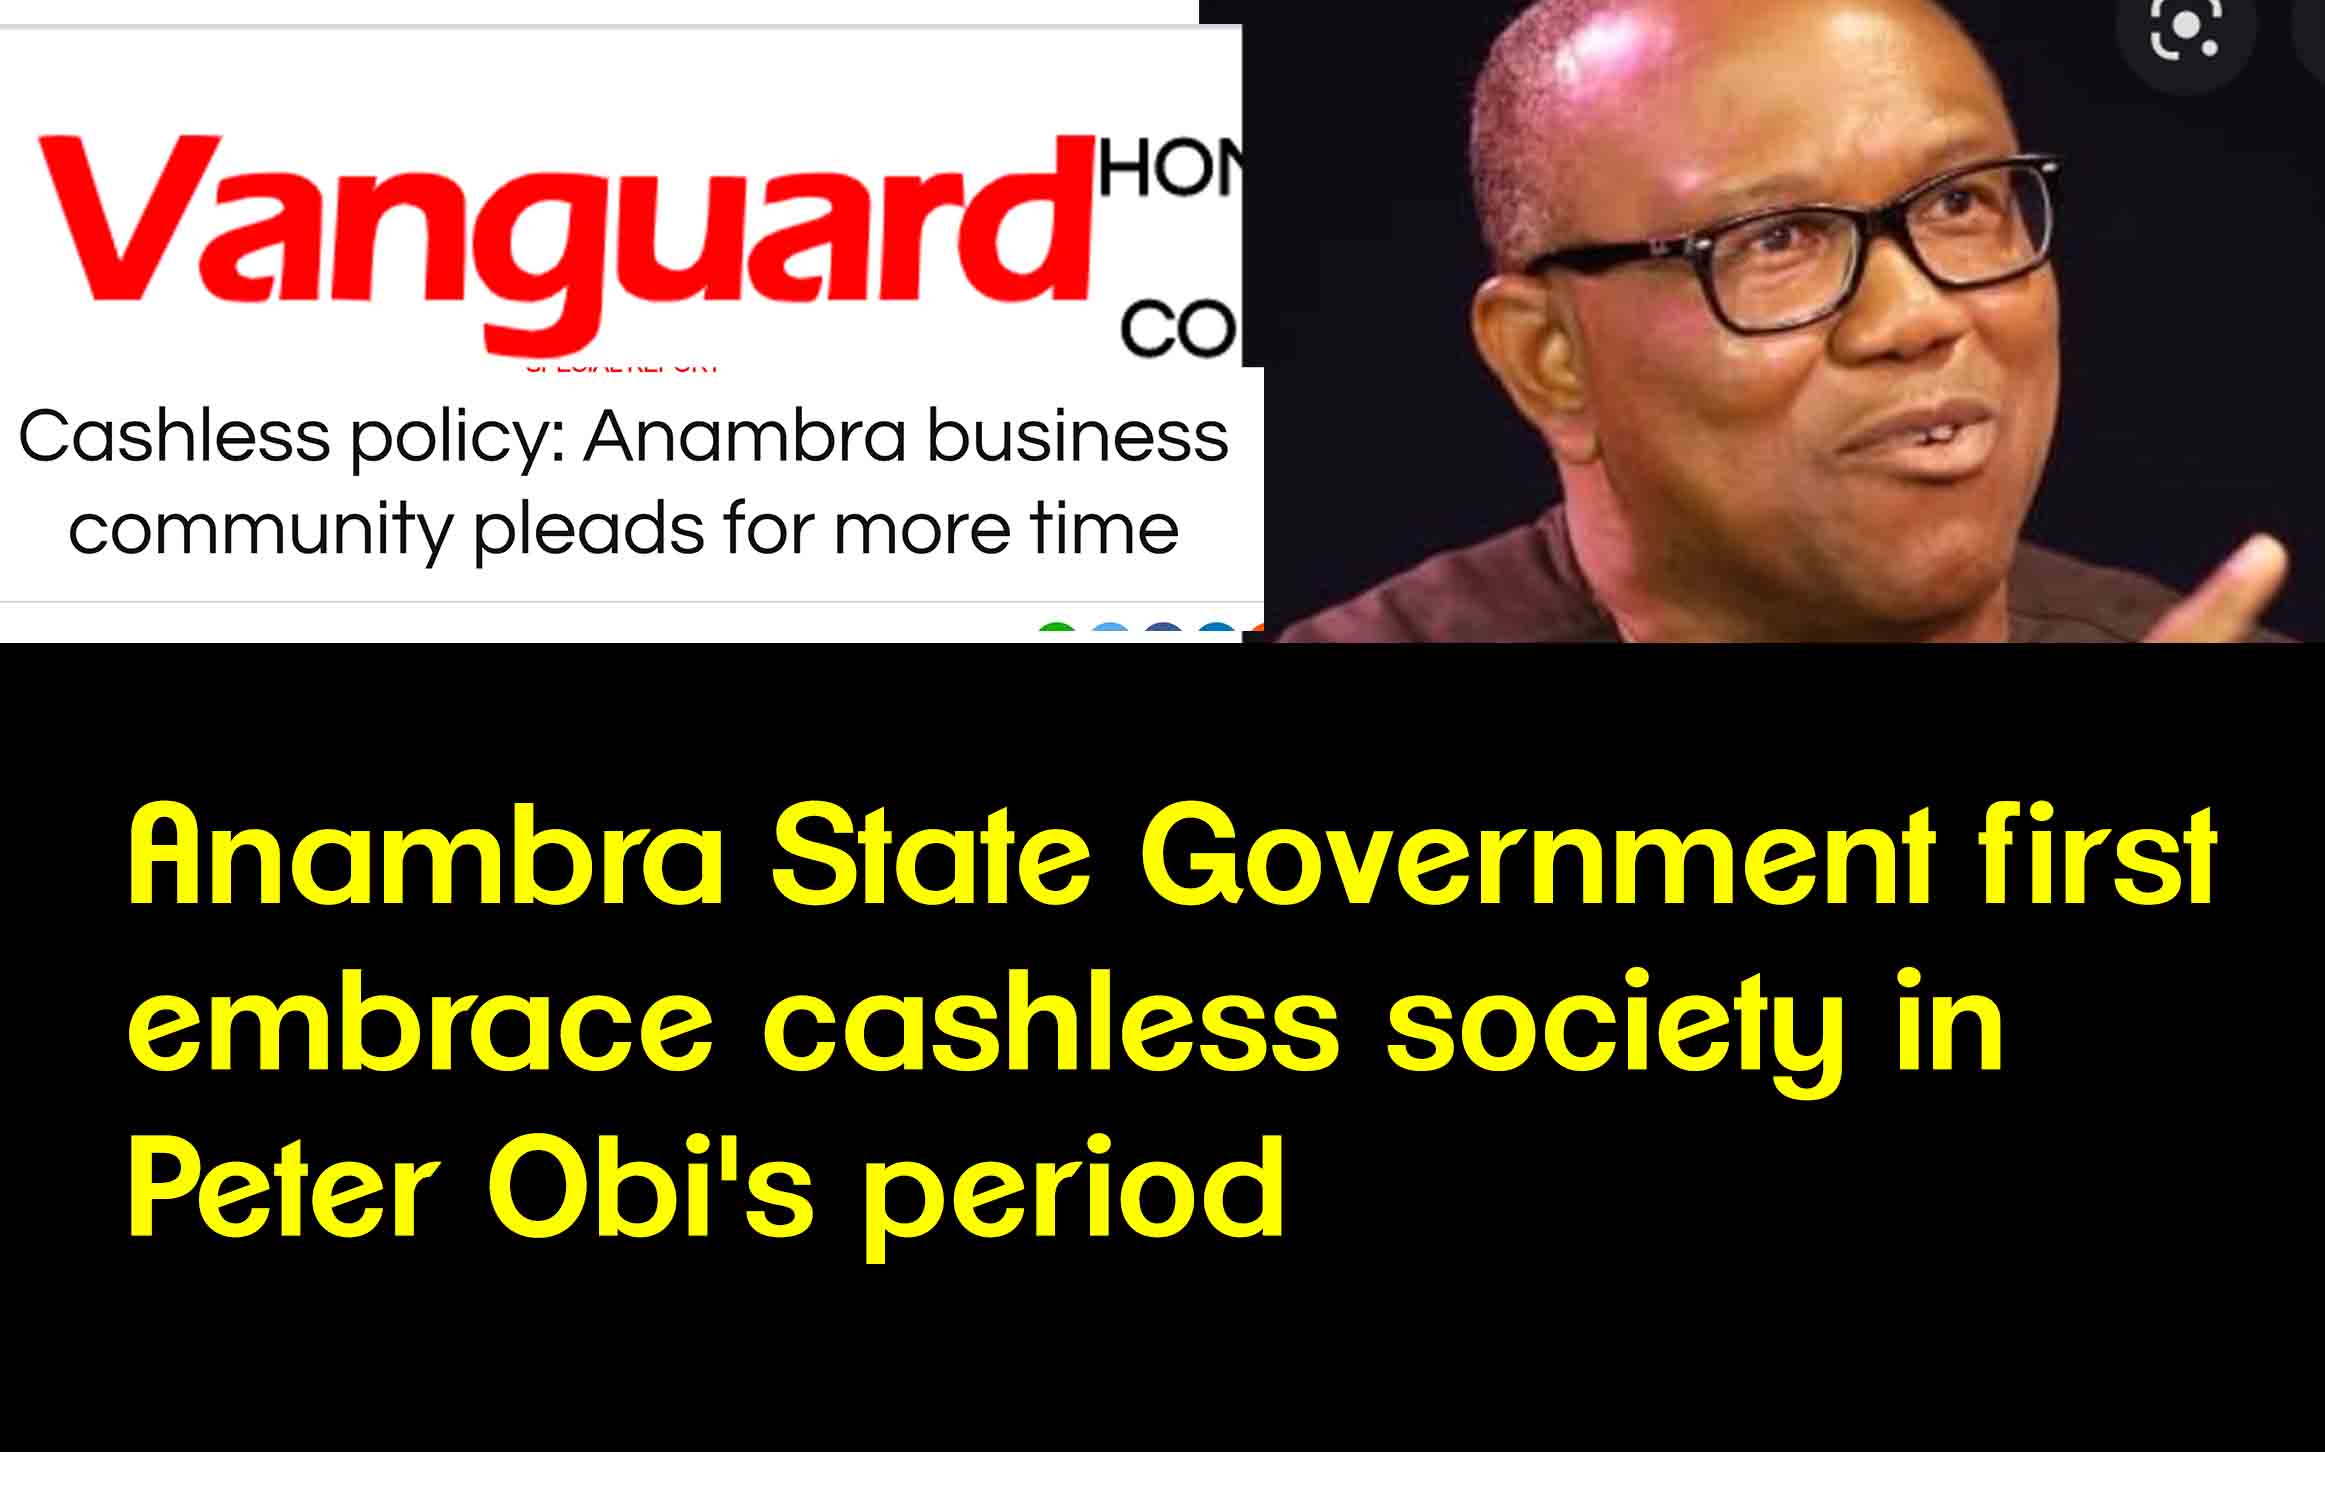 Anambra State Government first embrace cashless society in Peter Obi’s period